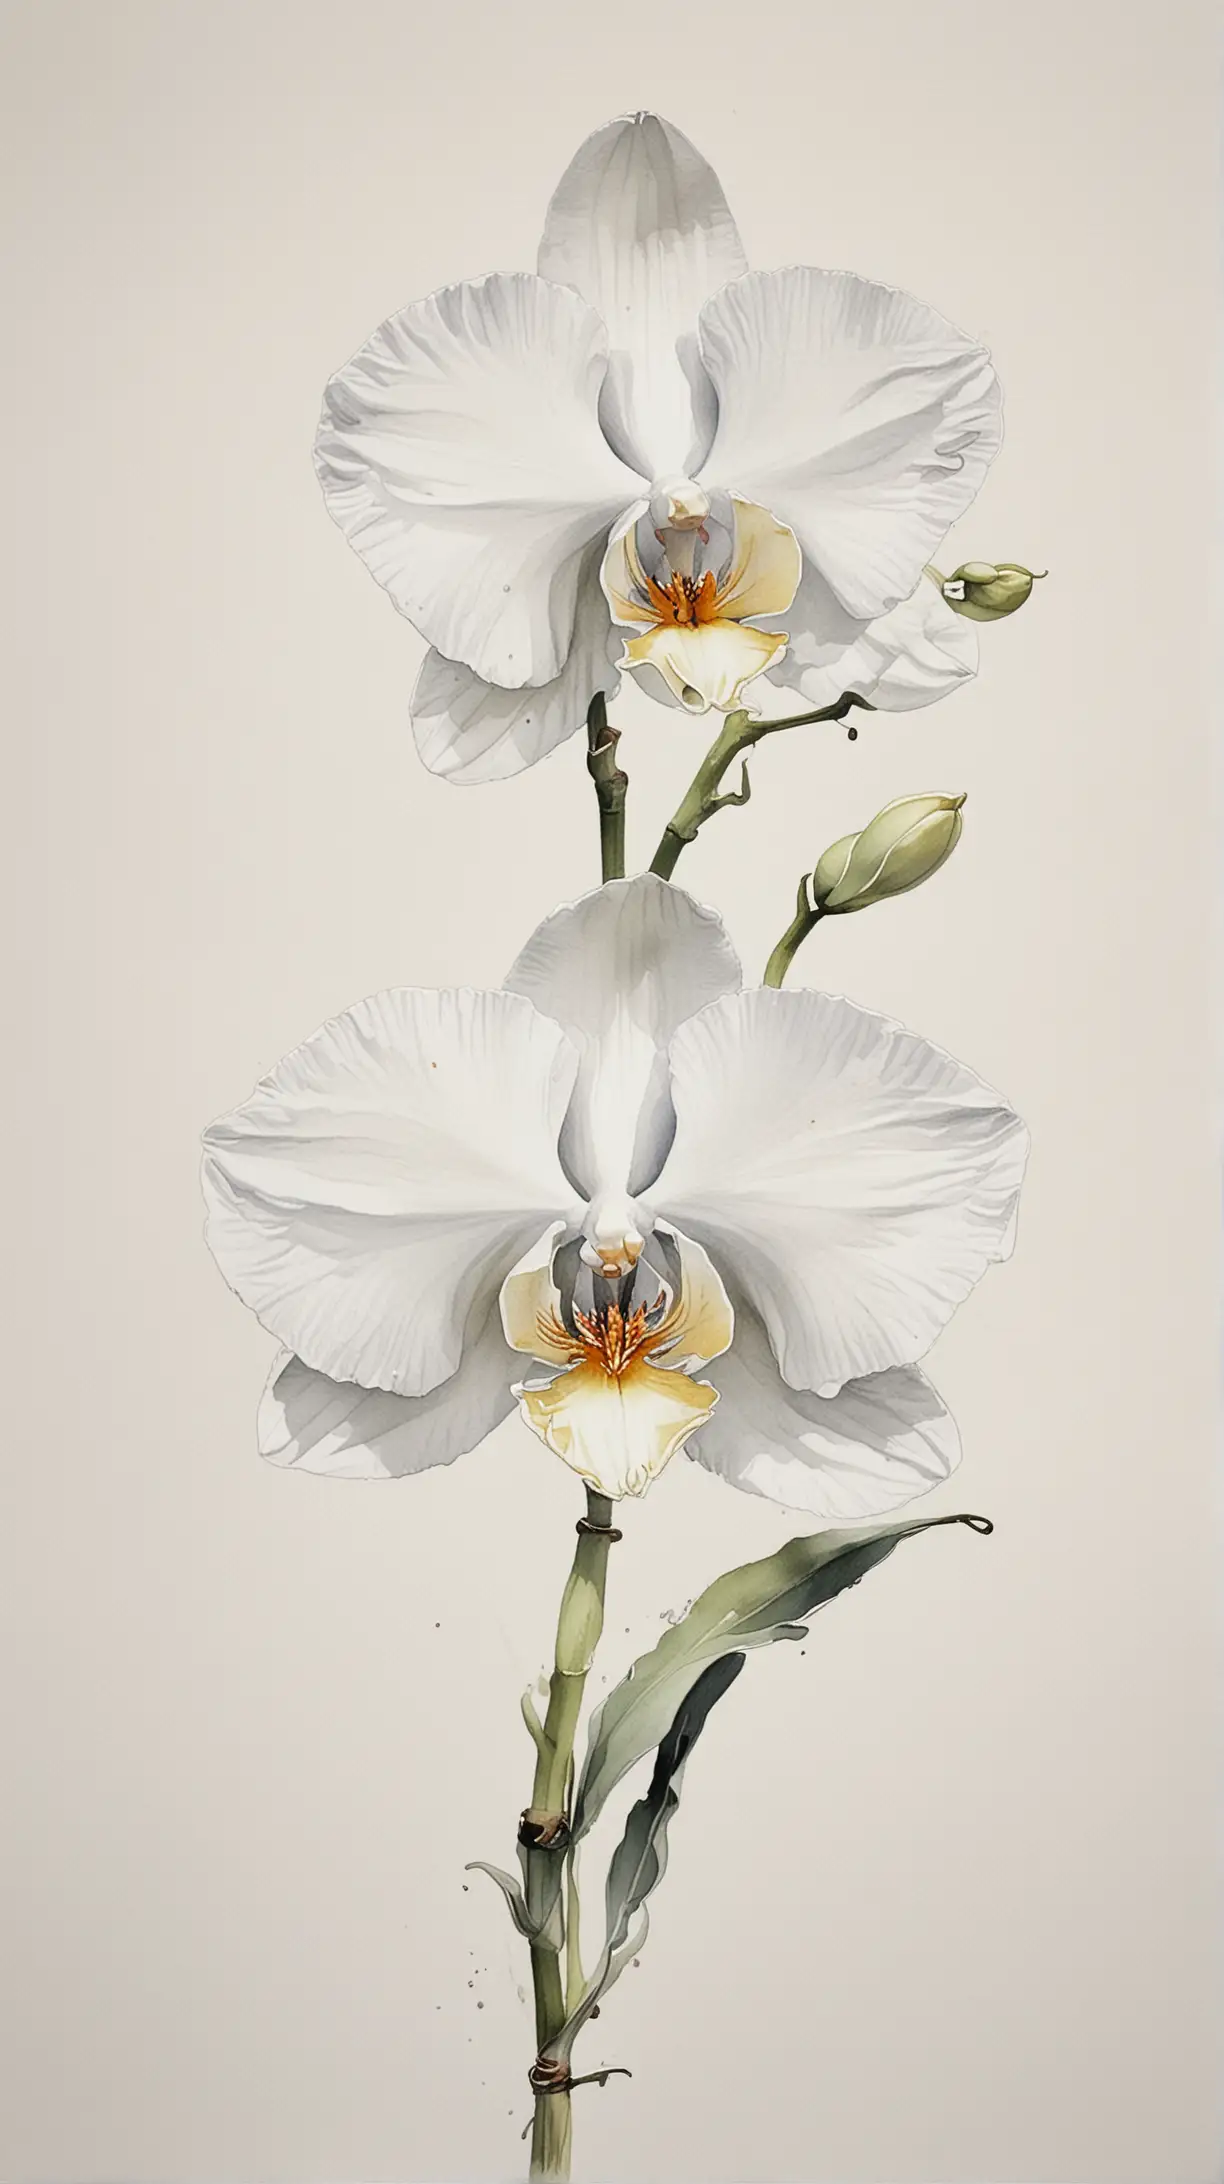 Loose Brush Strokes Watercolour Illustration of White Orchid on Solid White Background